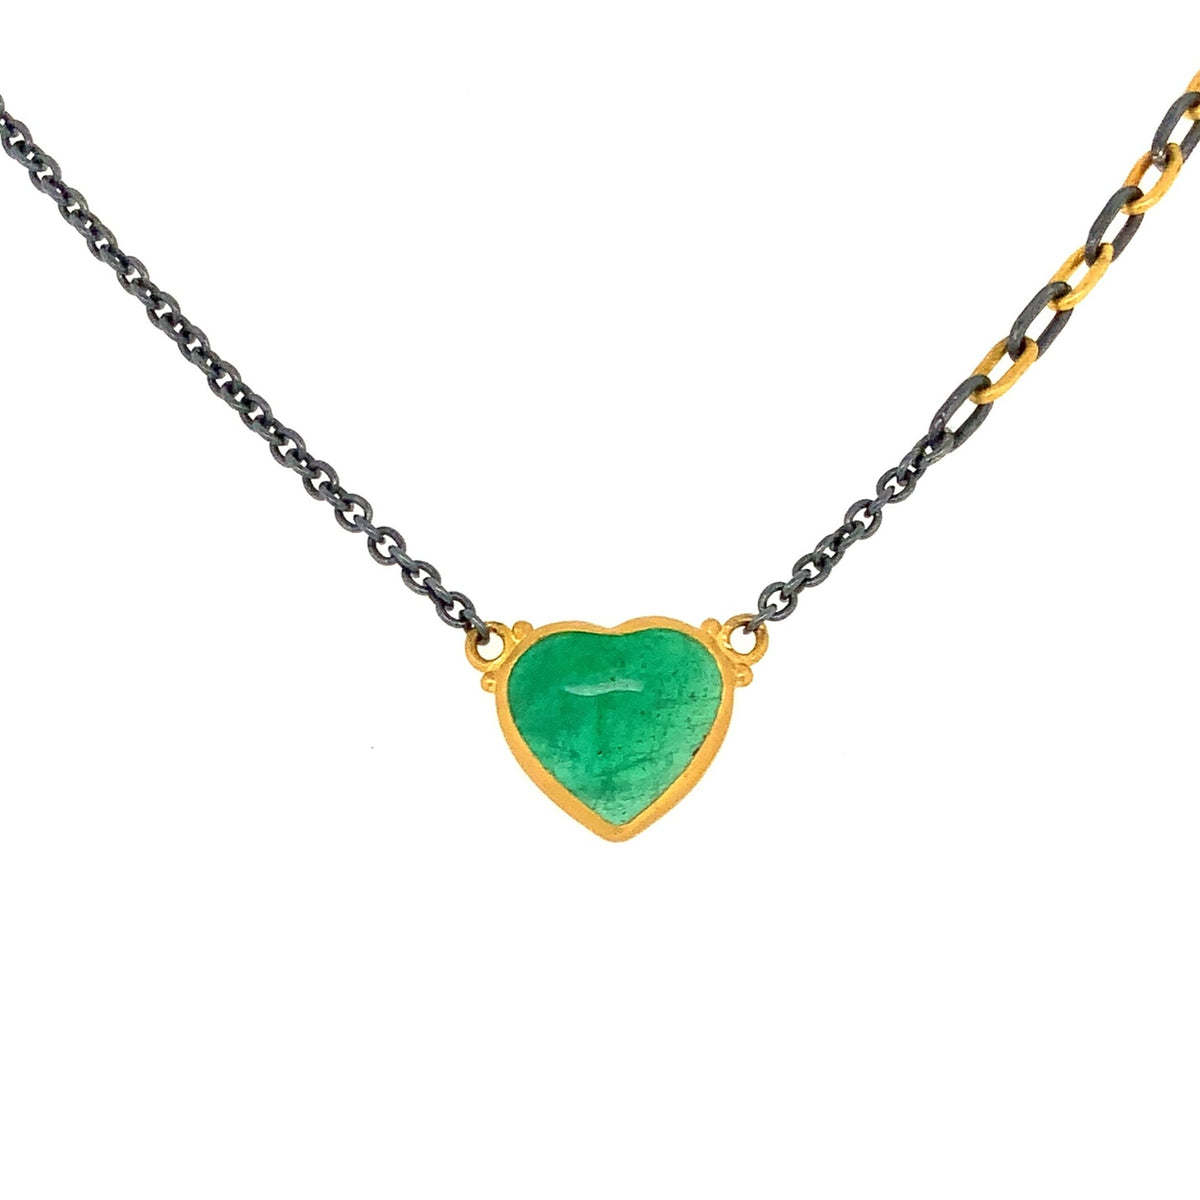 Emerald Heart Necklace in 14K Yellow Gold - M. Flynn